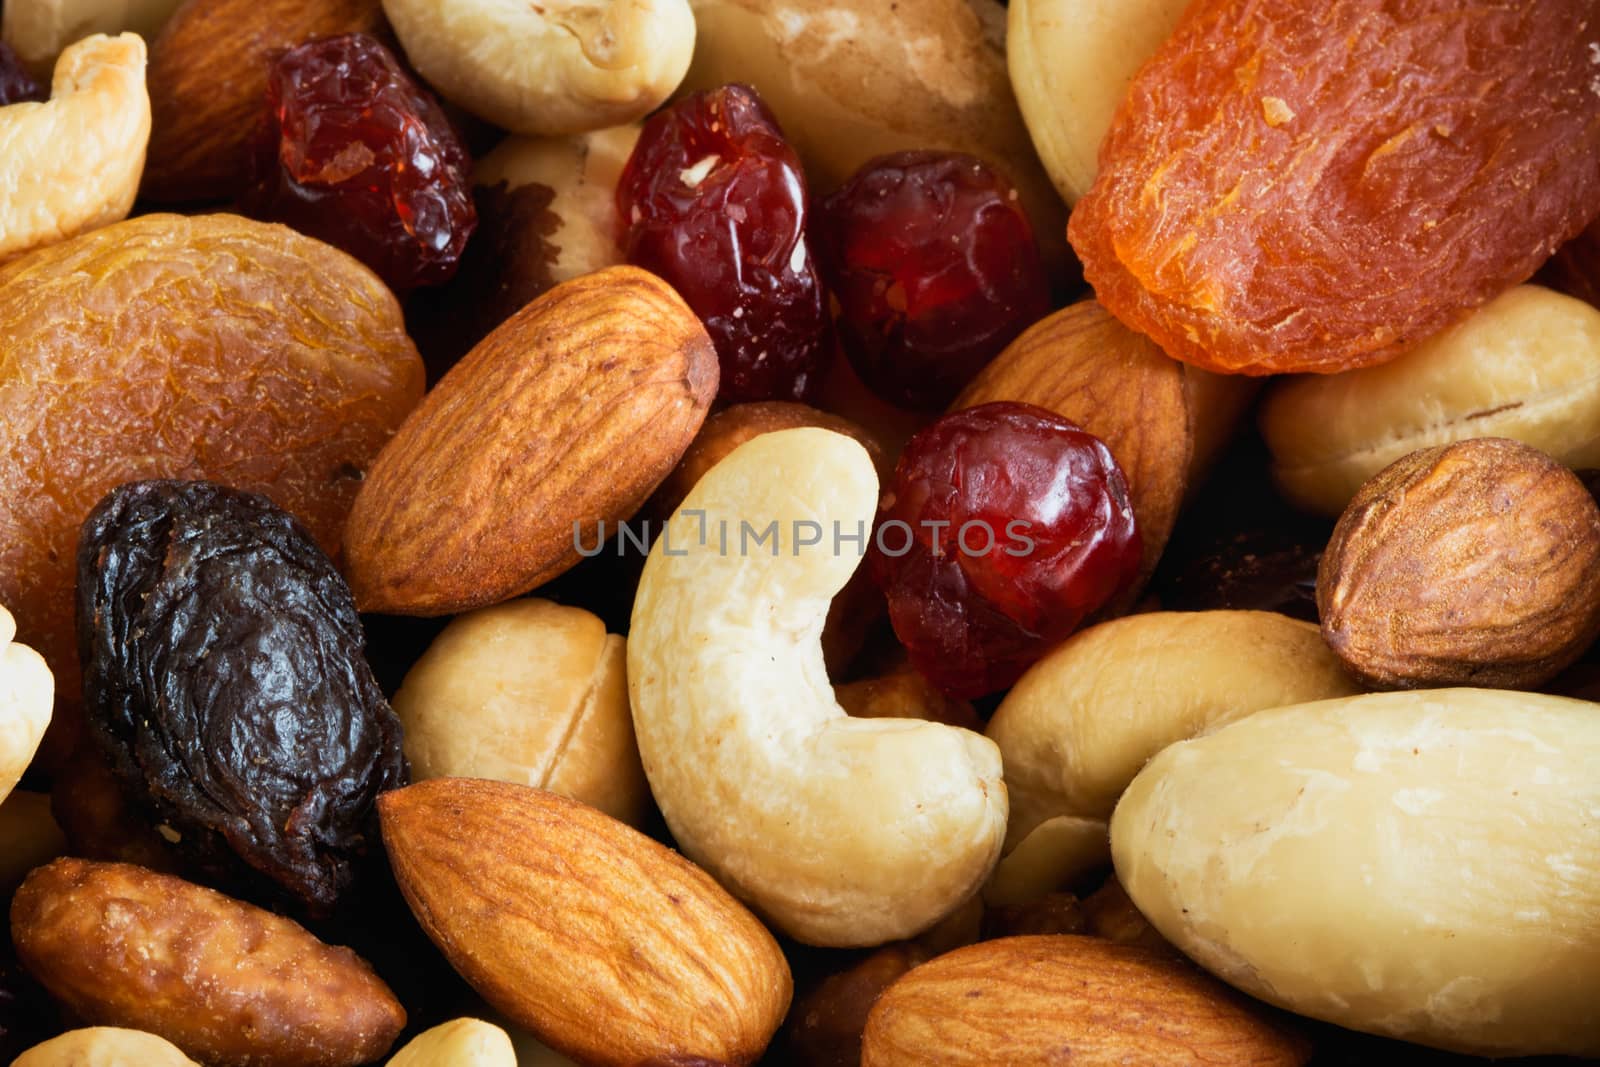 A mixture of various nuts with dried fruit closeup